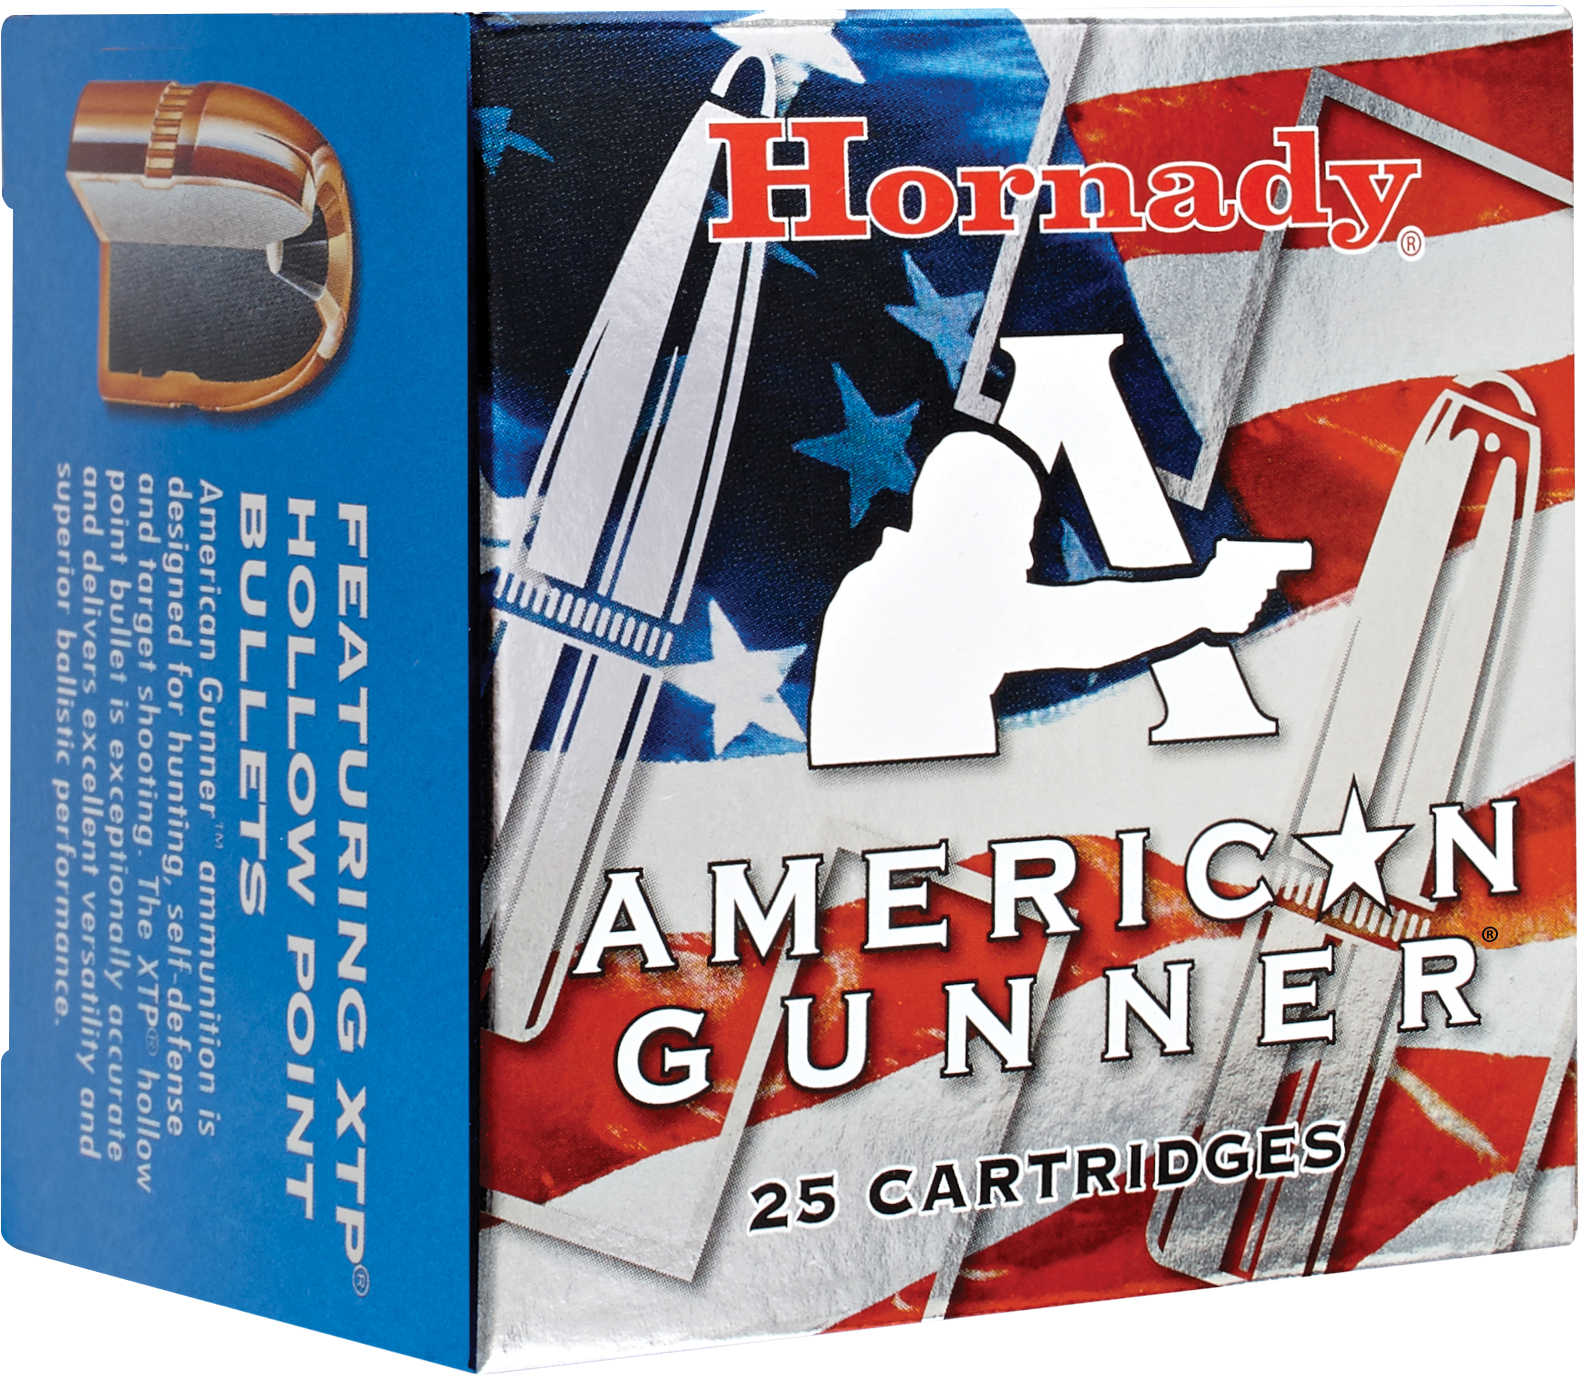 380 ACP 25 Rounds Ammunition Hornady 90 Grain Jacketed Hollow Point